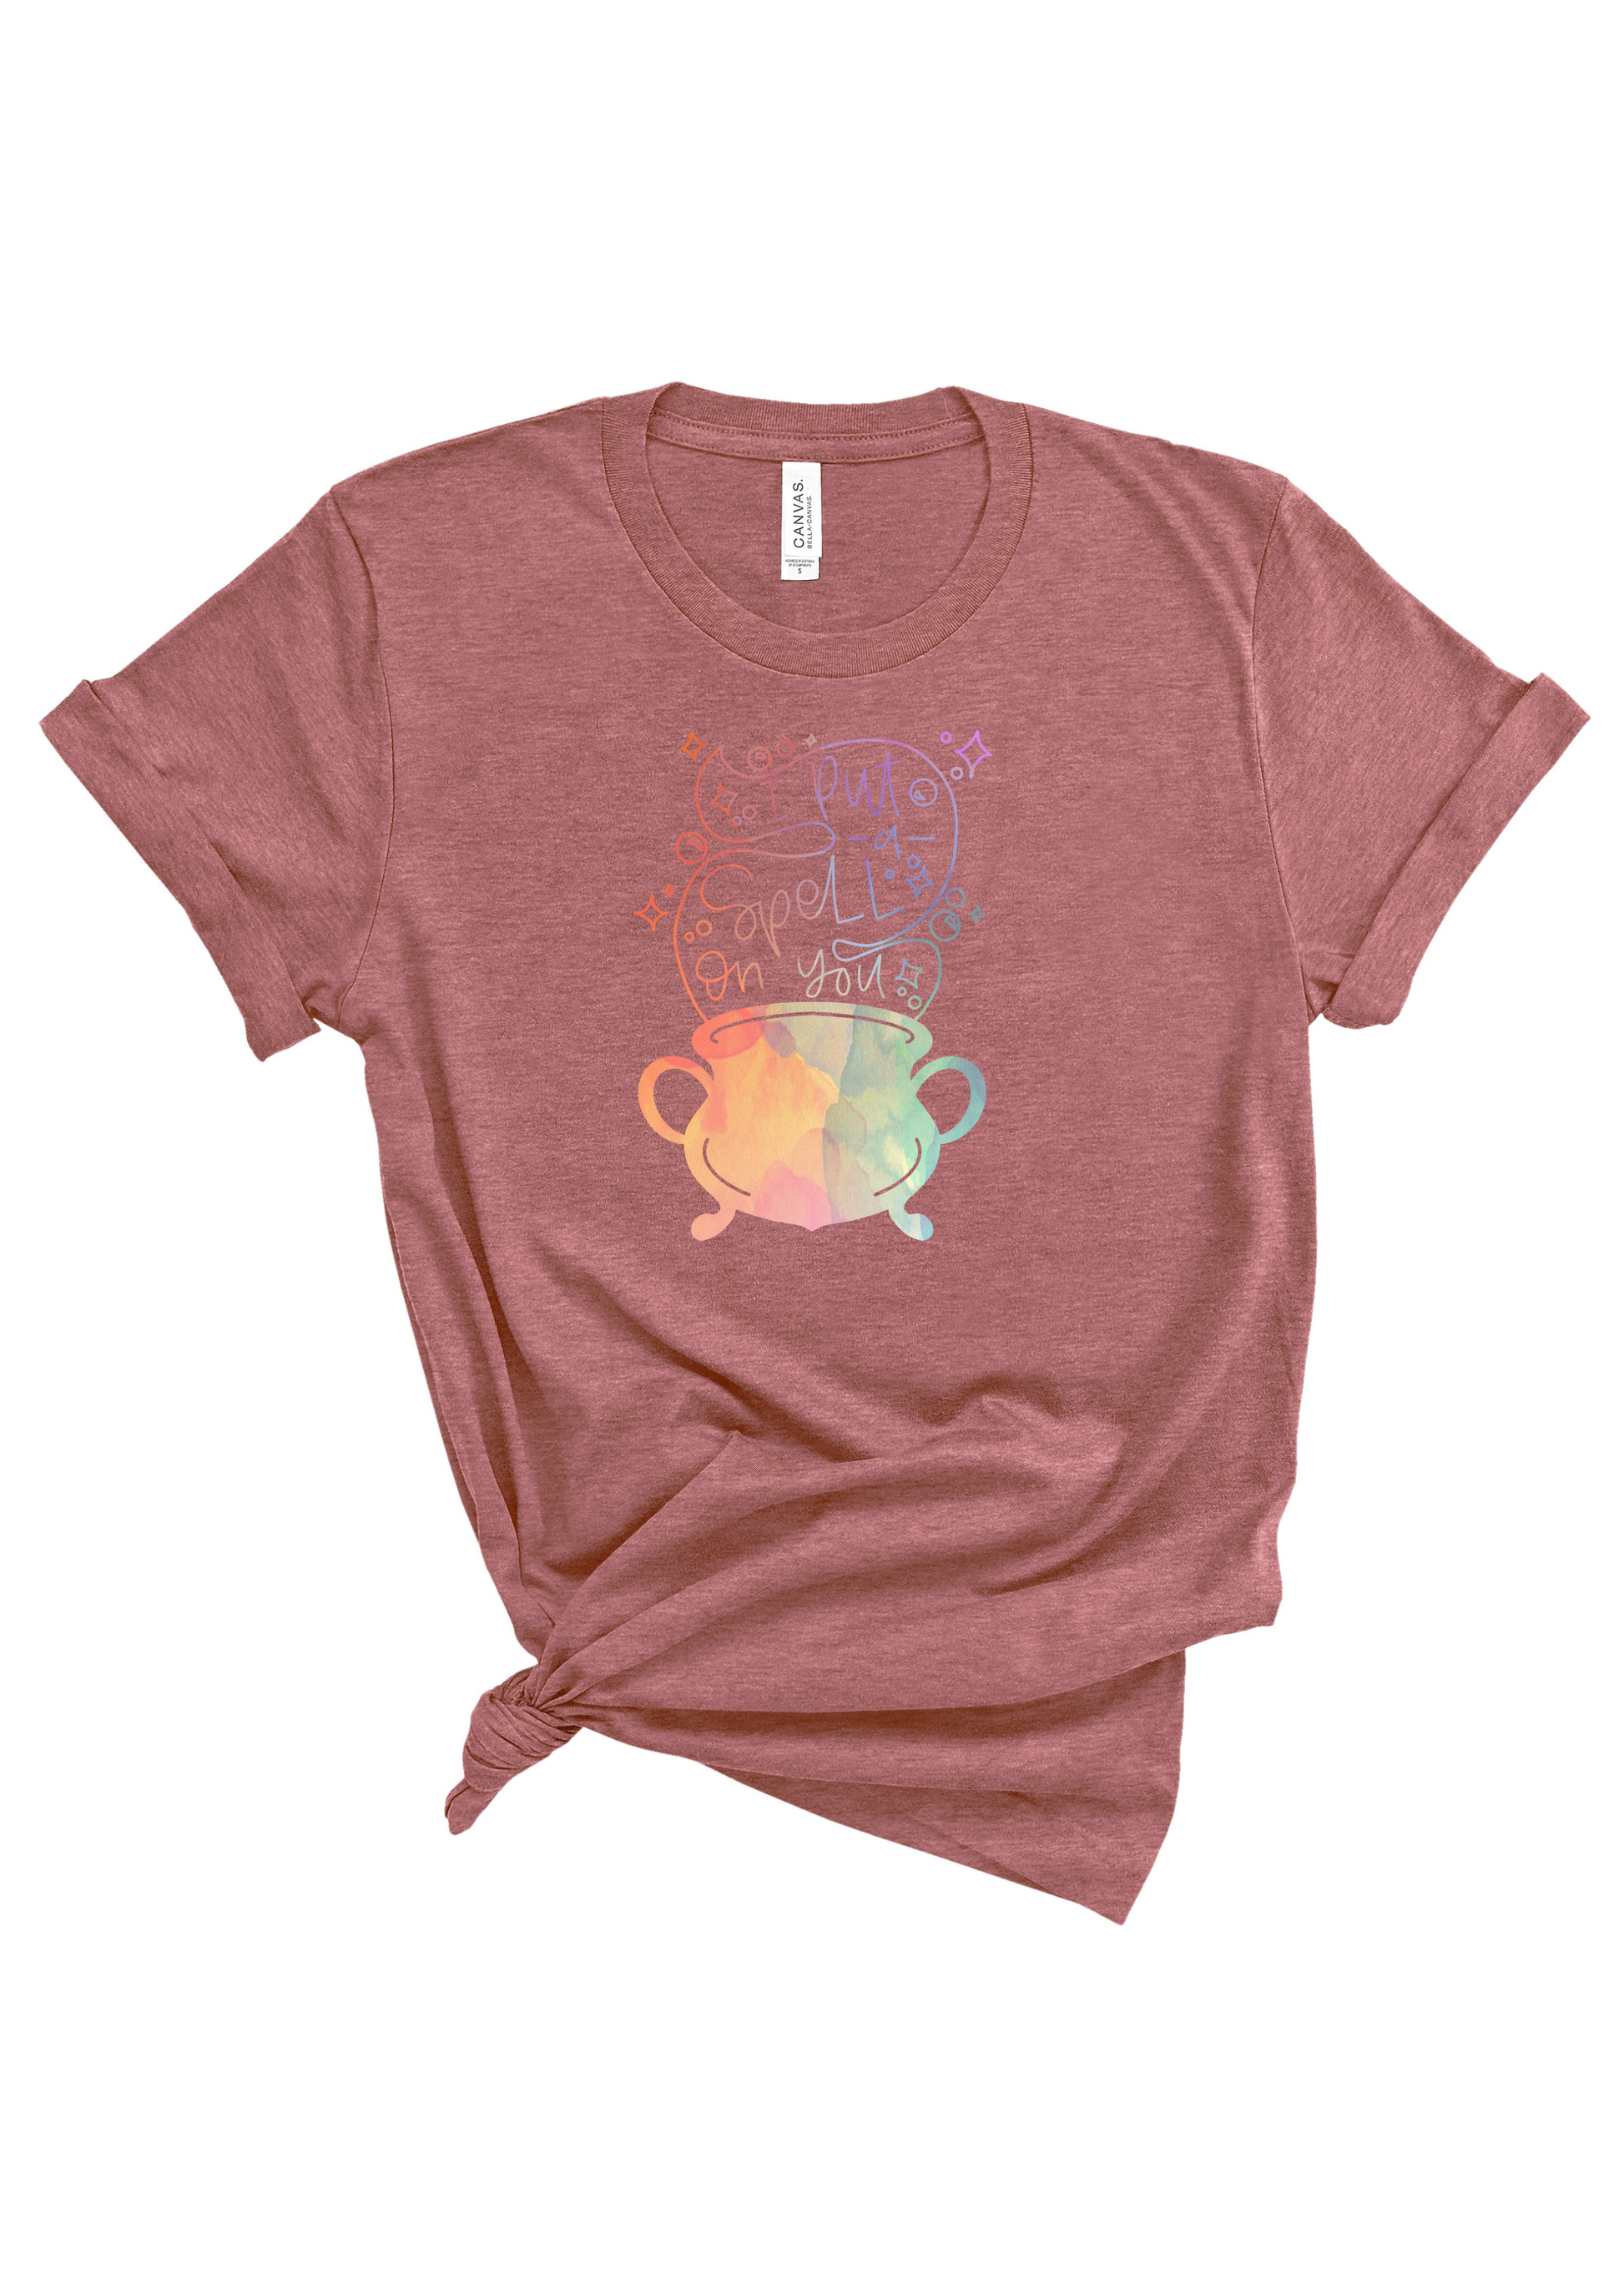 I Put a Spell on You | Tee | RTS-Sister Shirts-Sister Shirts, Cute & Custom Tees for Mama & Littles in Trussville, Alabama.